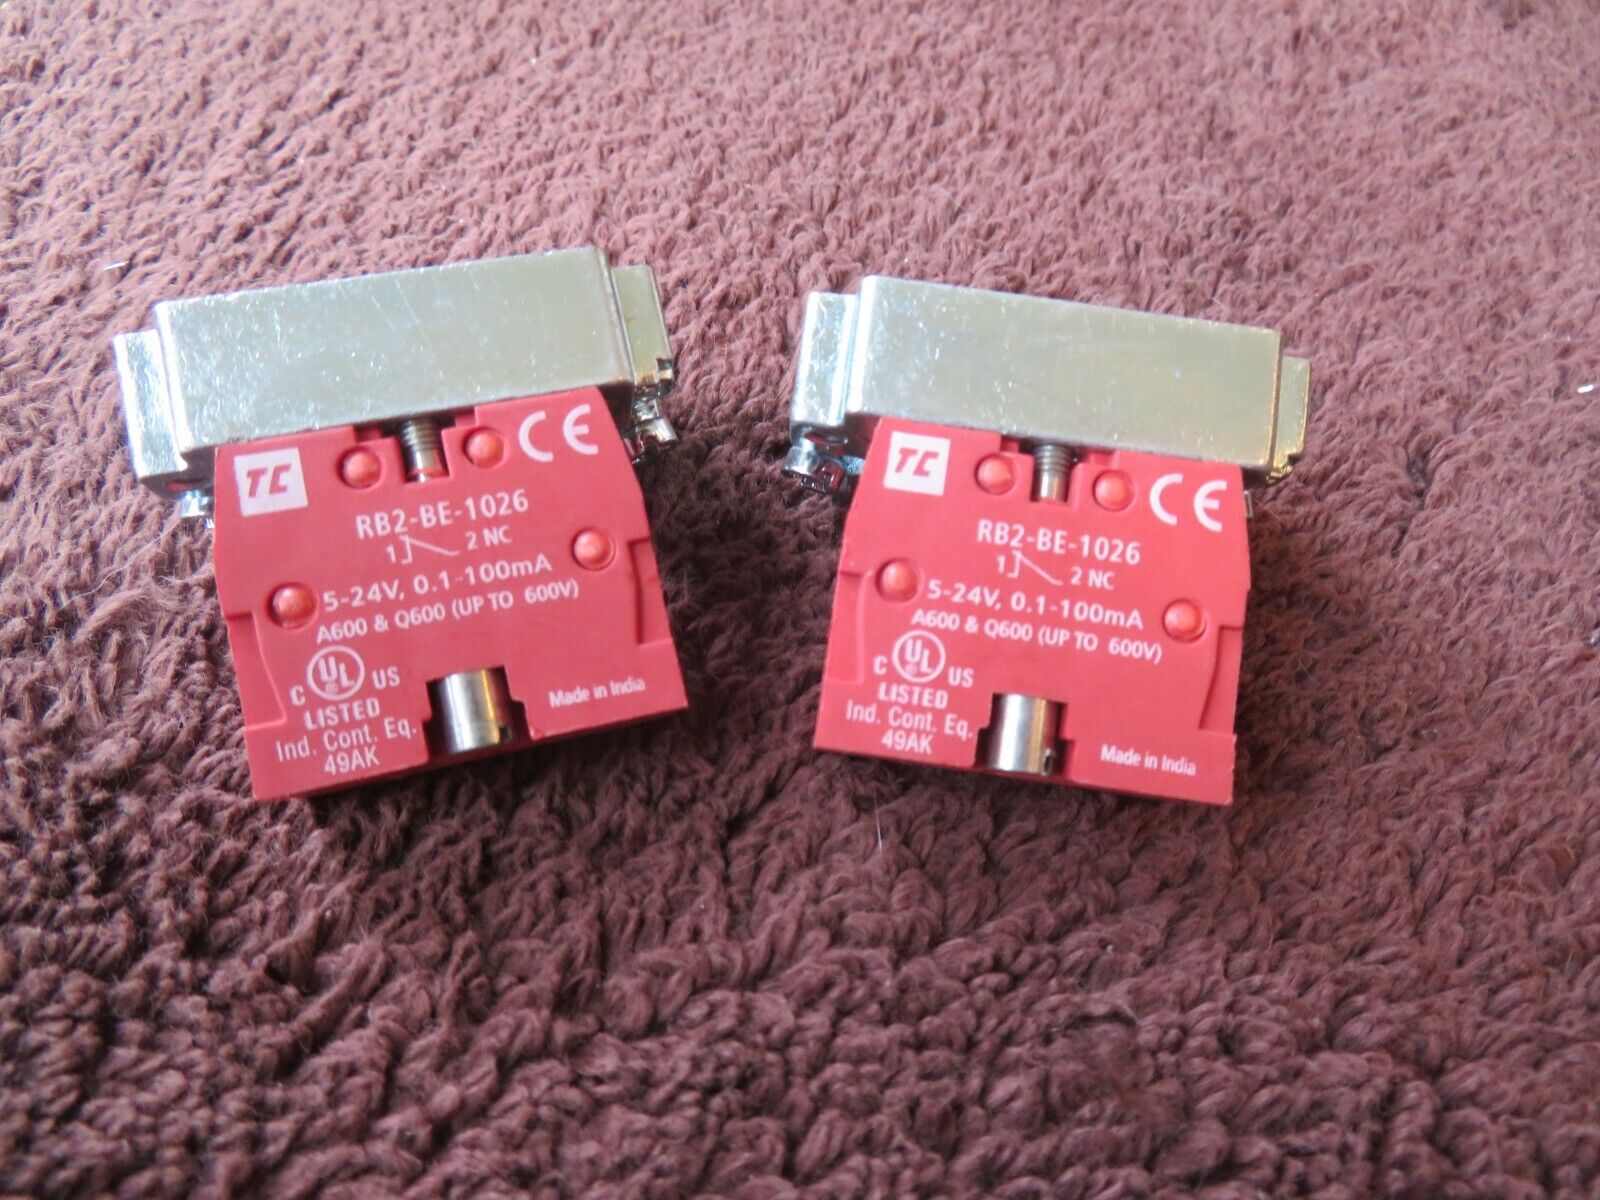 NEW LOT OF 2 SHAMROCK CONTACT BLOCK SWITCH RB2-BE-1026 5-24V VOLT 0.1-100mA